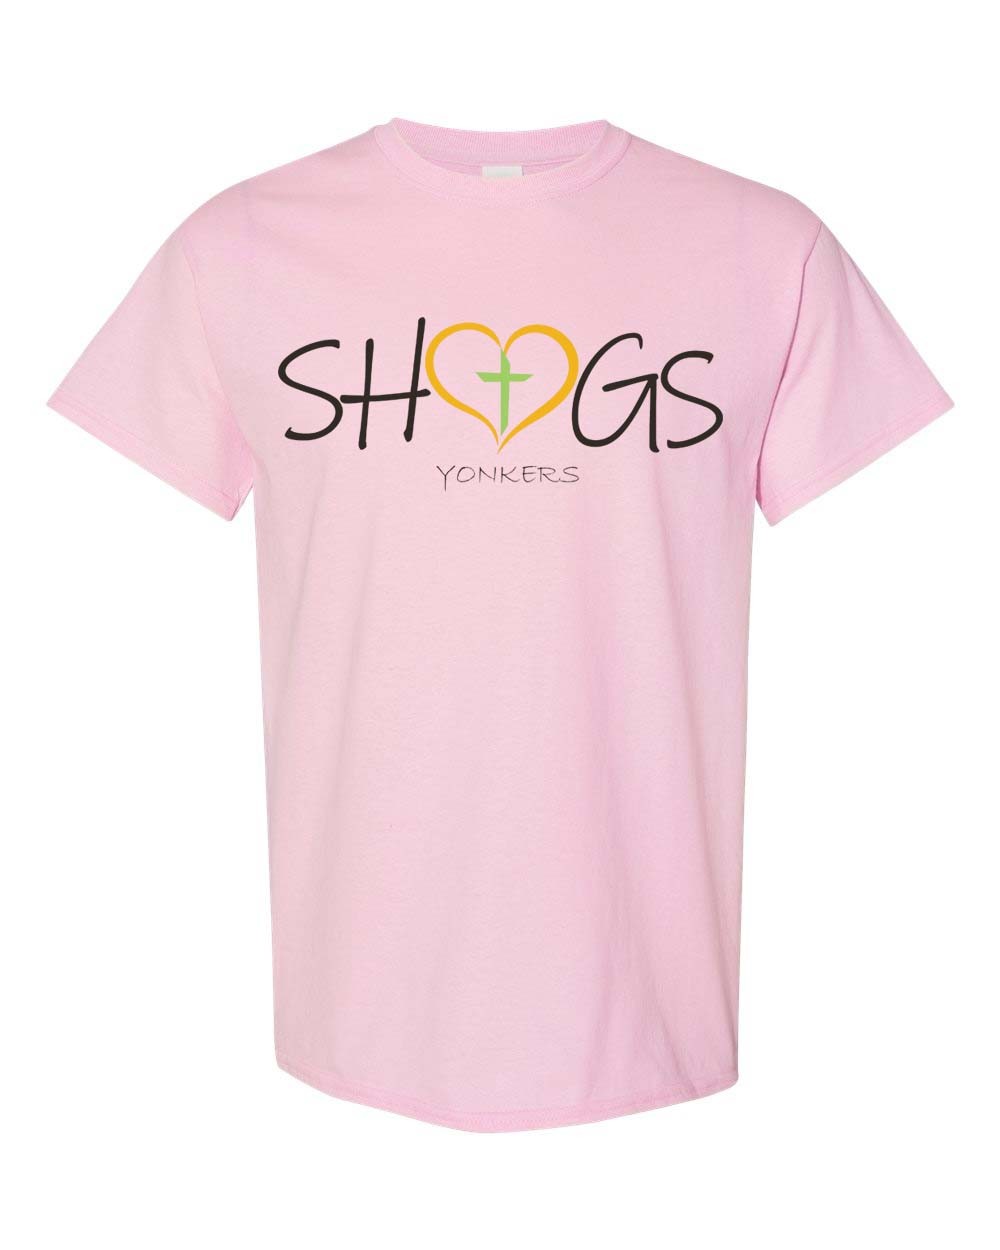 STAFF SHGS S/S T-Shirt w/ Heart Logo - Please Allow 2-3 Weeks for Delivery